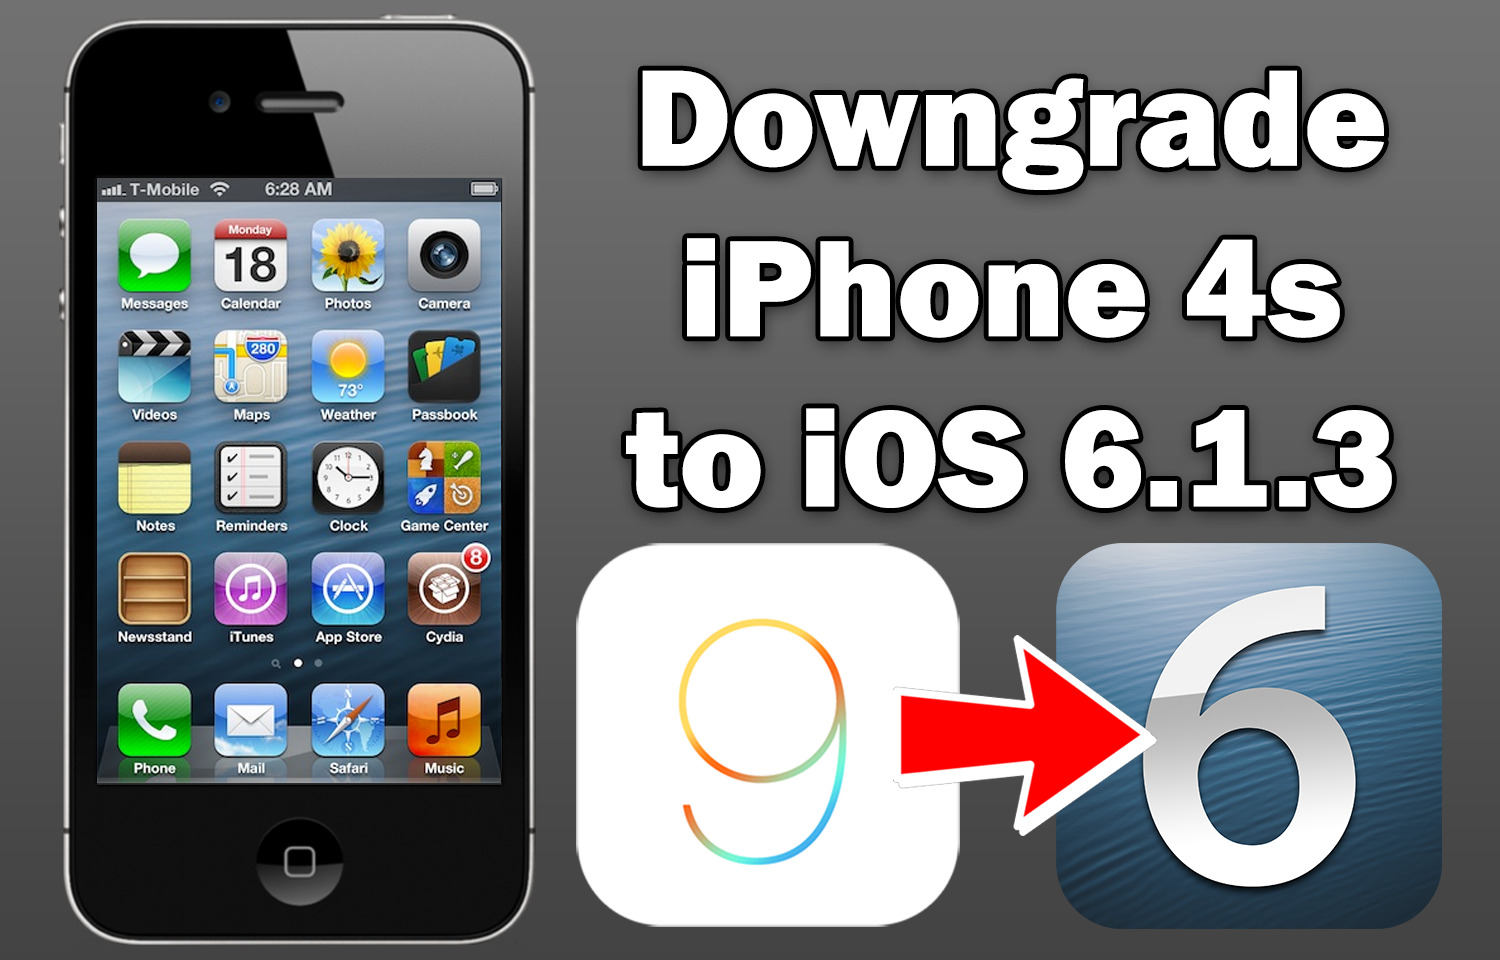 How To Downgrade Iphone 4s From Ios 9 To Ios 6 1 3 Without Shsh Blobs Ipodhacks142